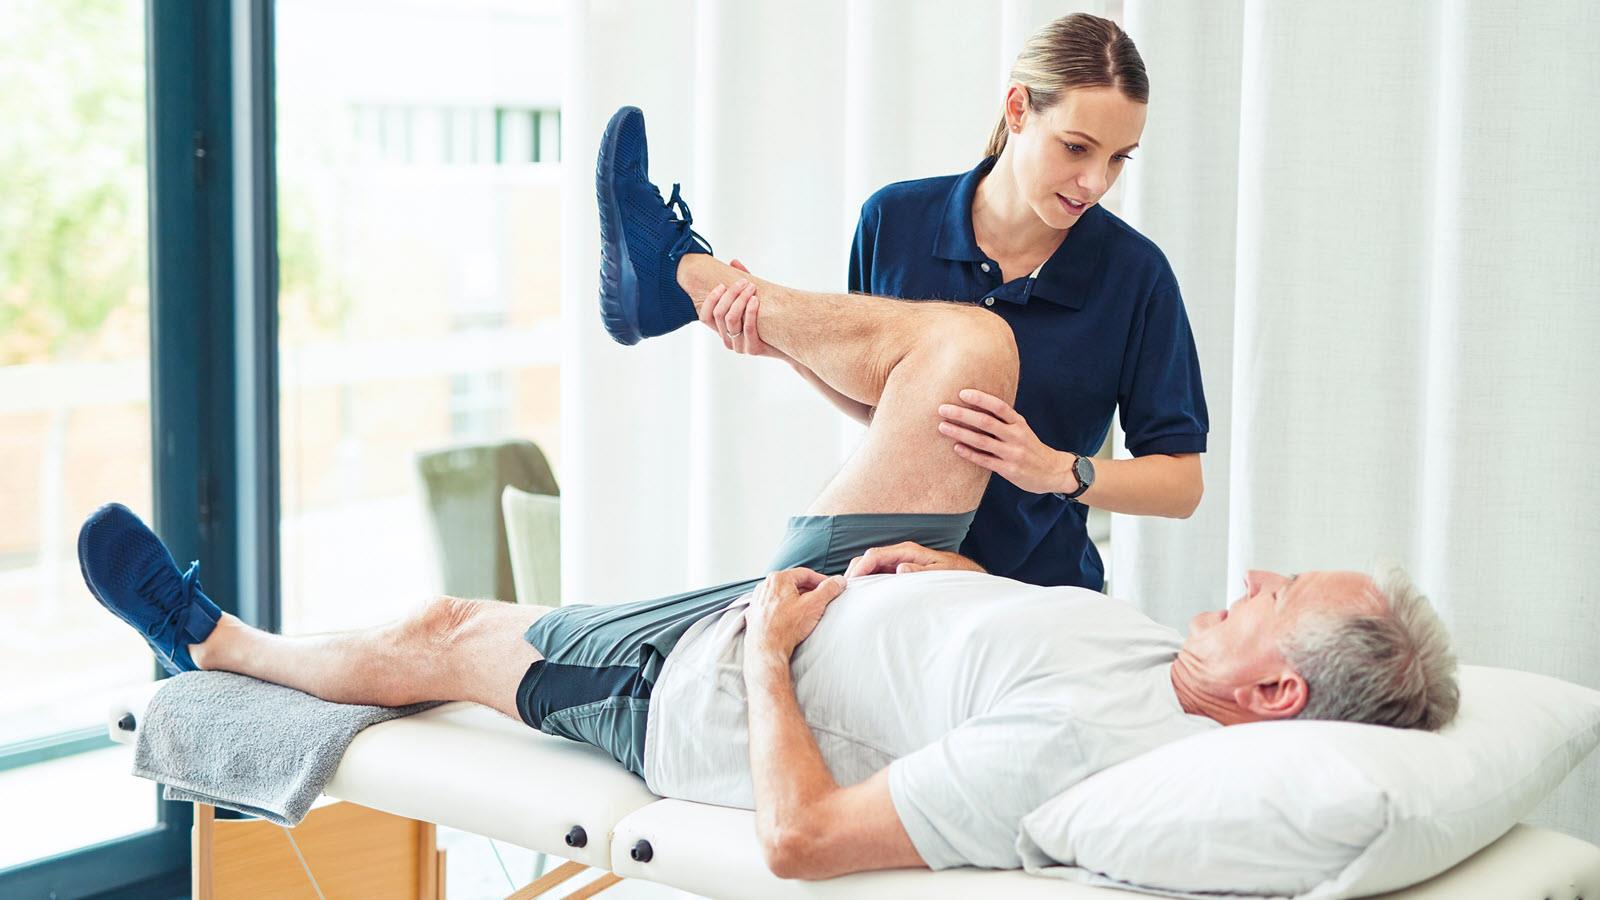 A physical therapist helps a patient with a leg exercise